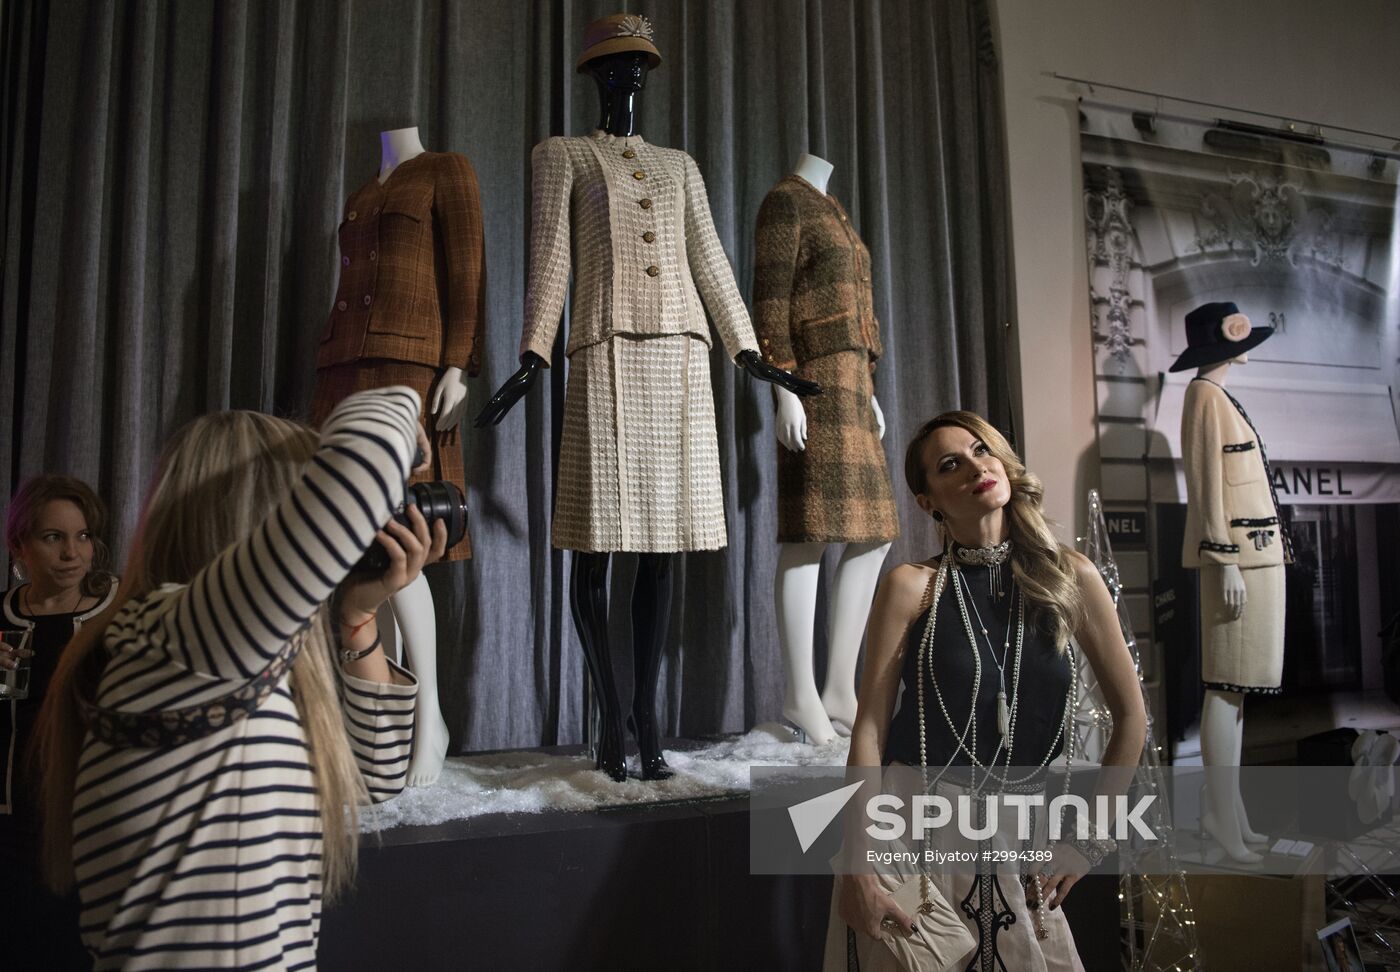 I Love Chanel.Private Collections exhibition opens in Moscow